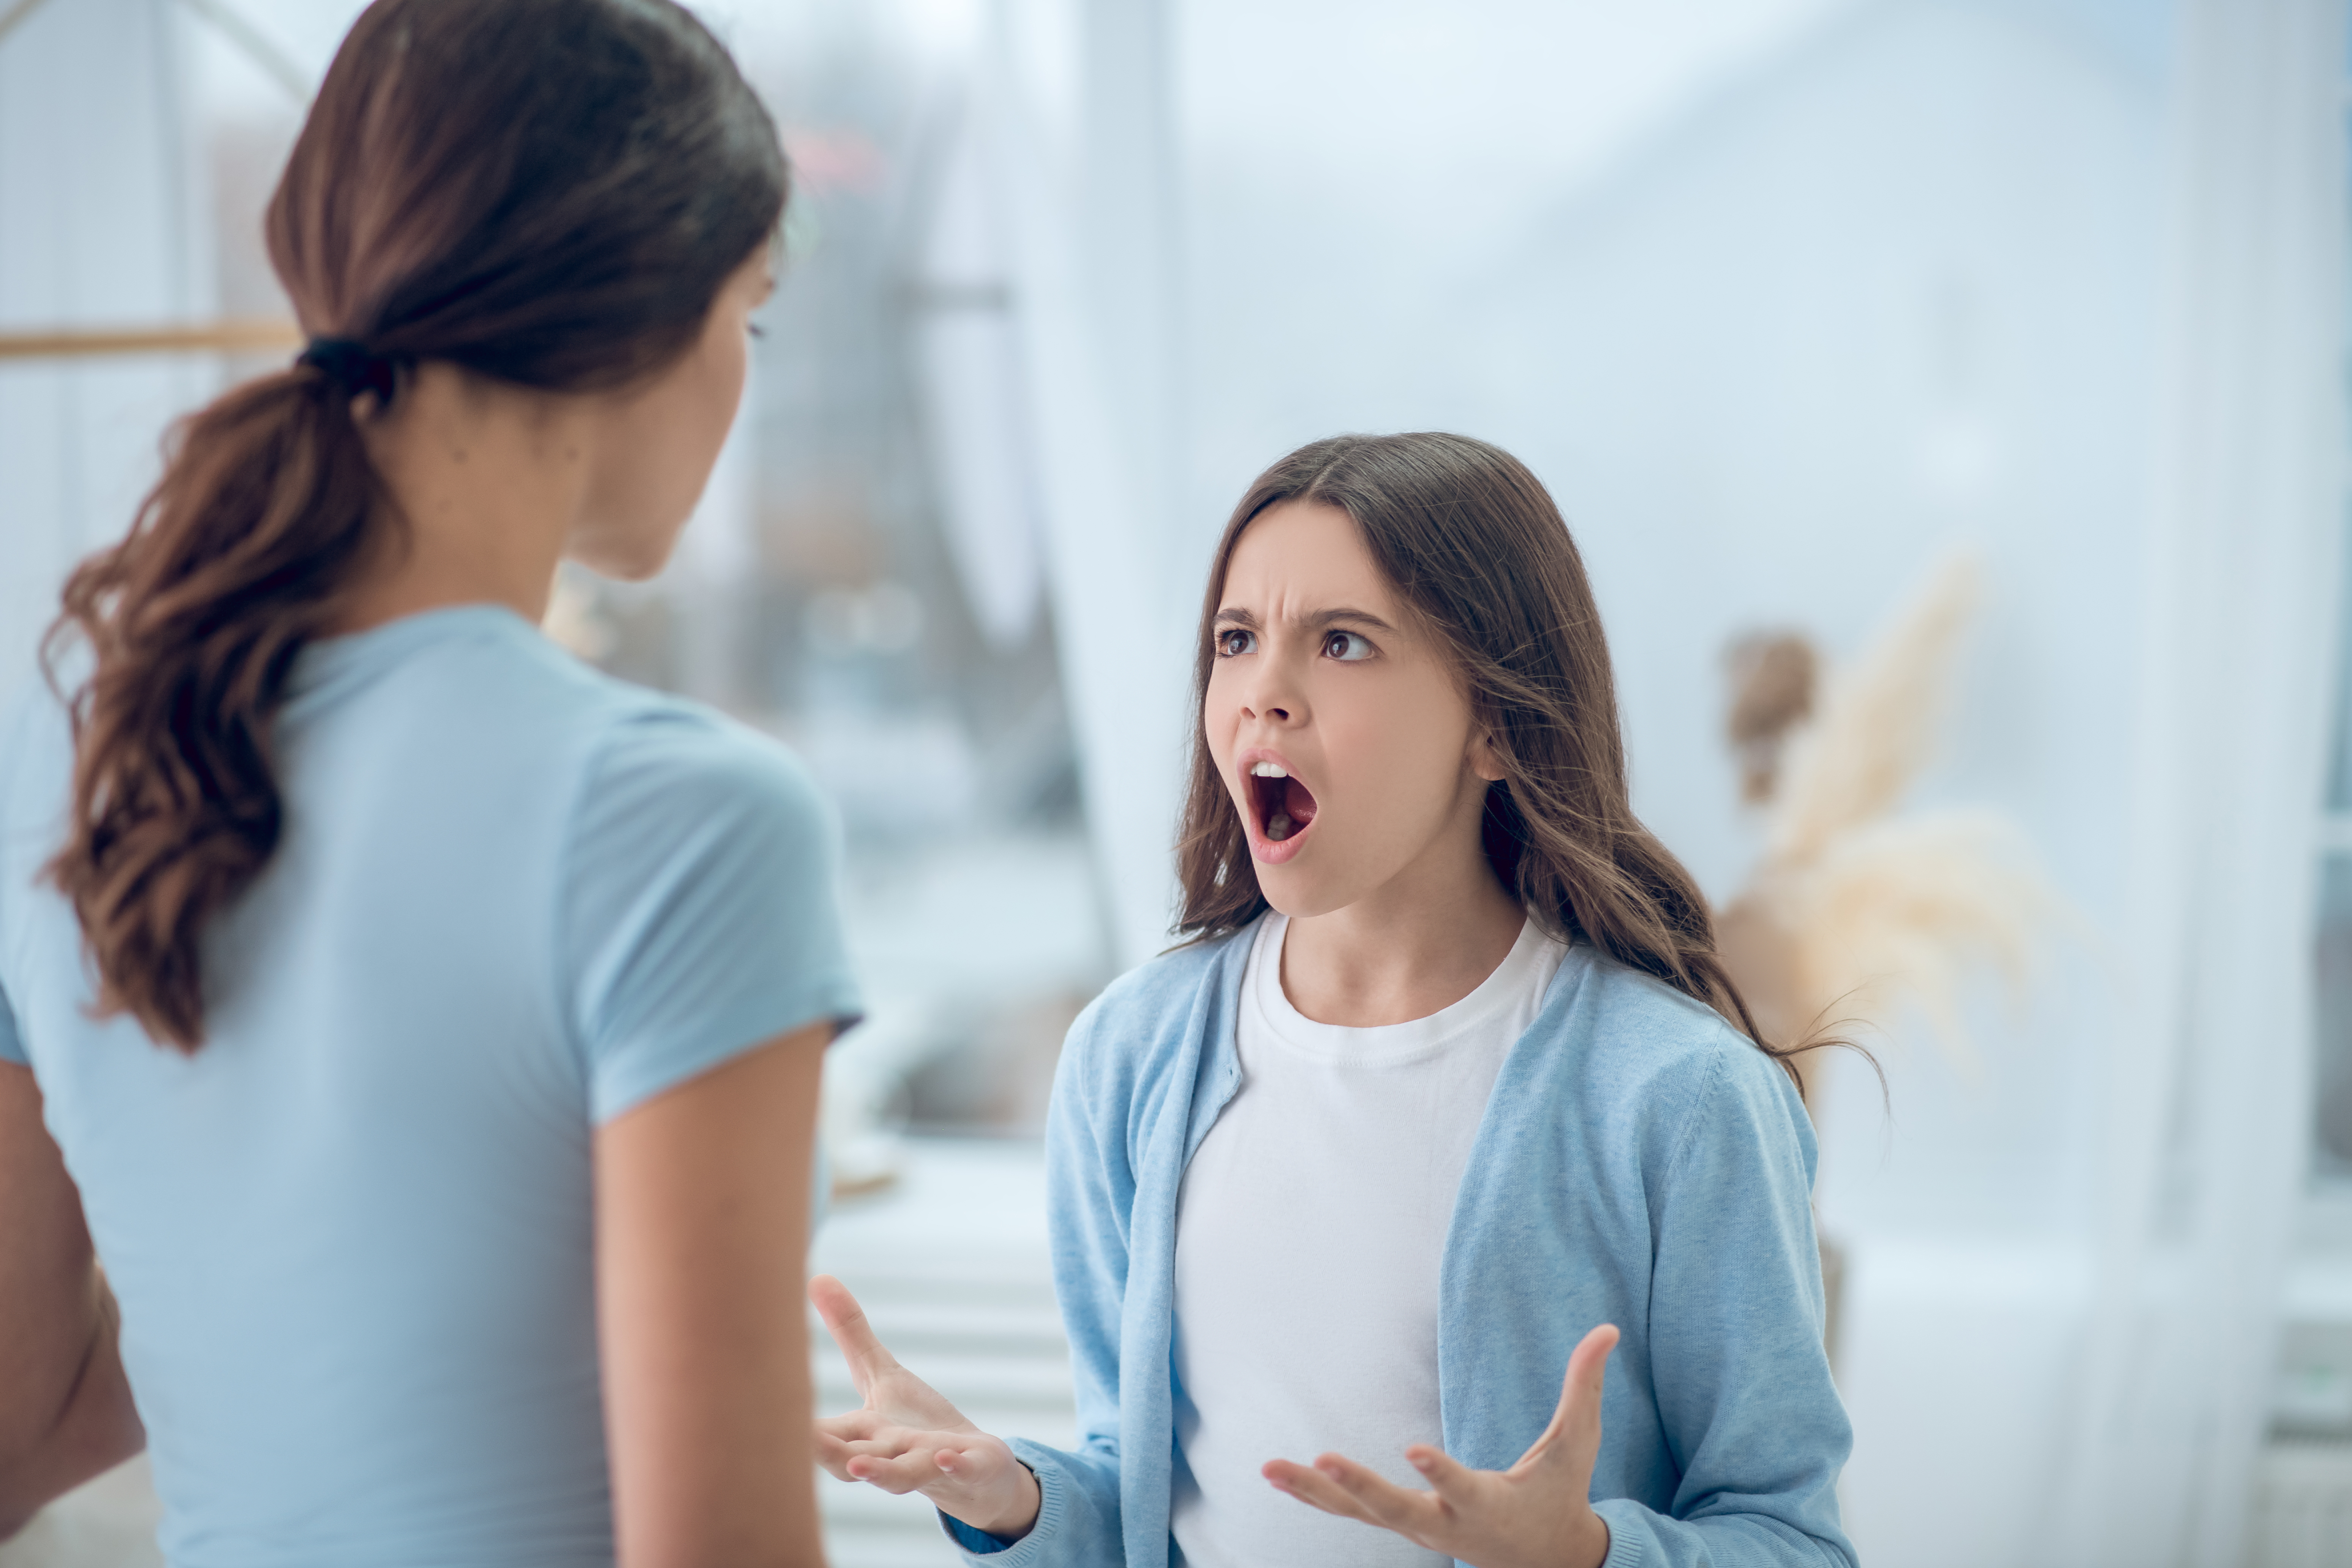 An angry young girl shouting at her mother | Source: Shutterstock